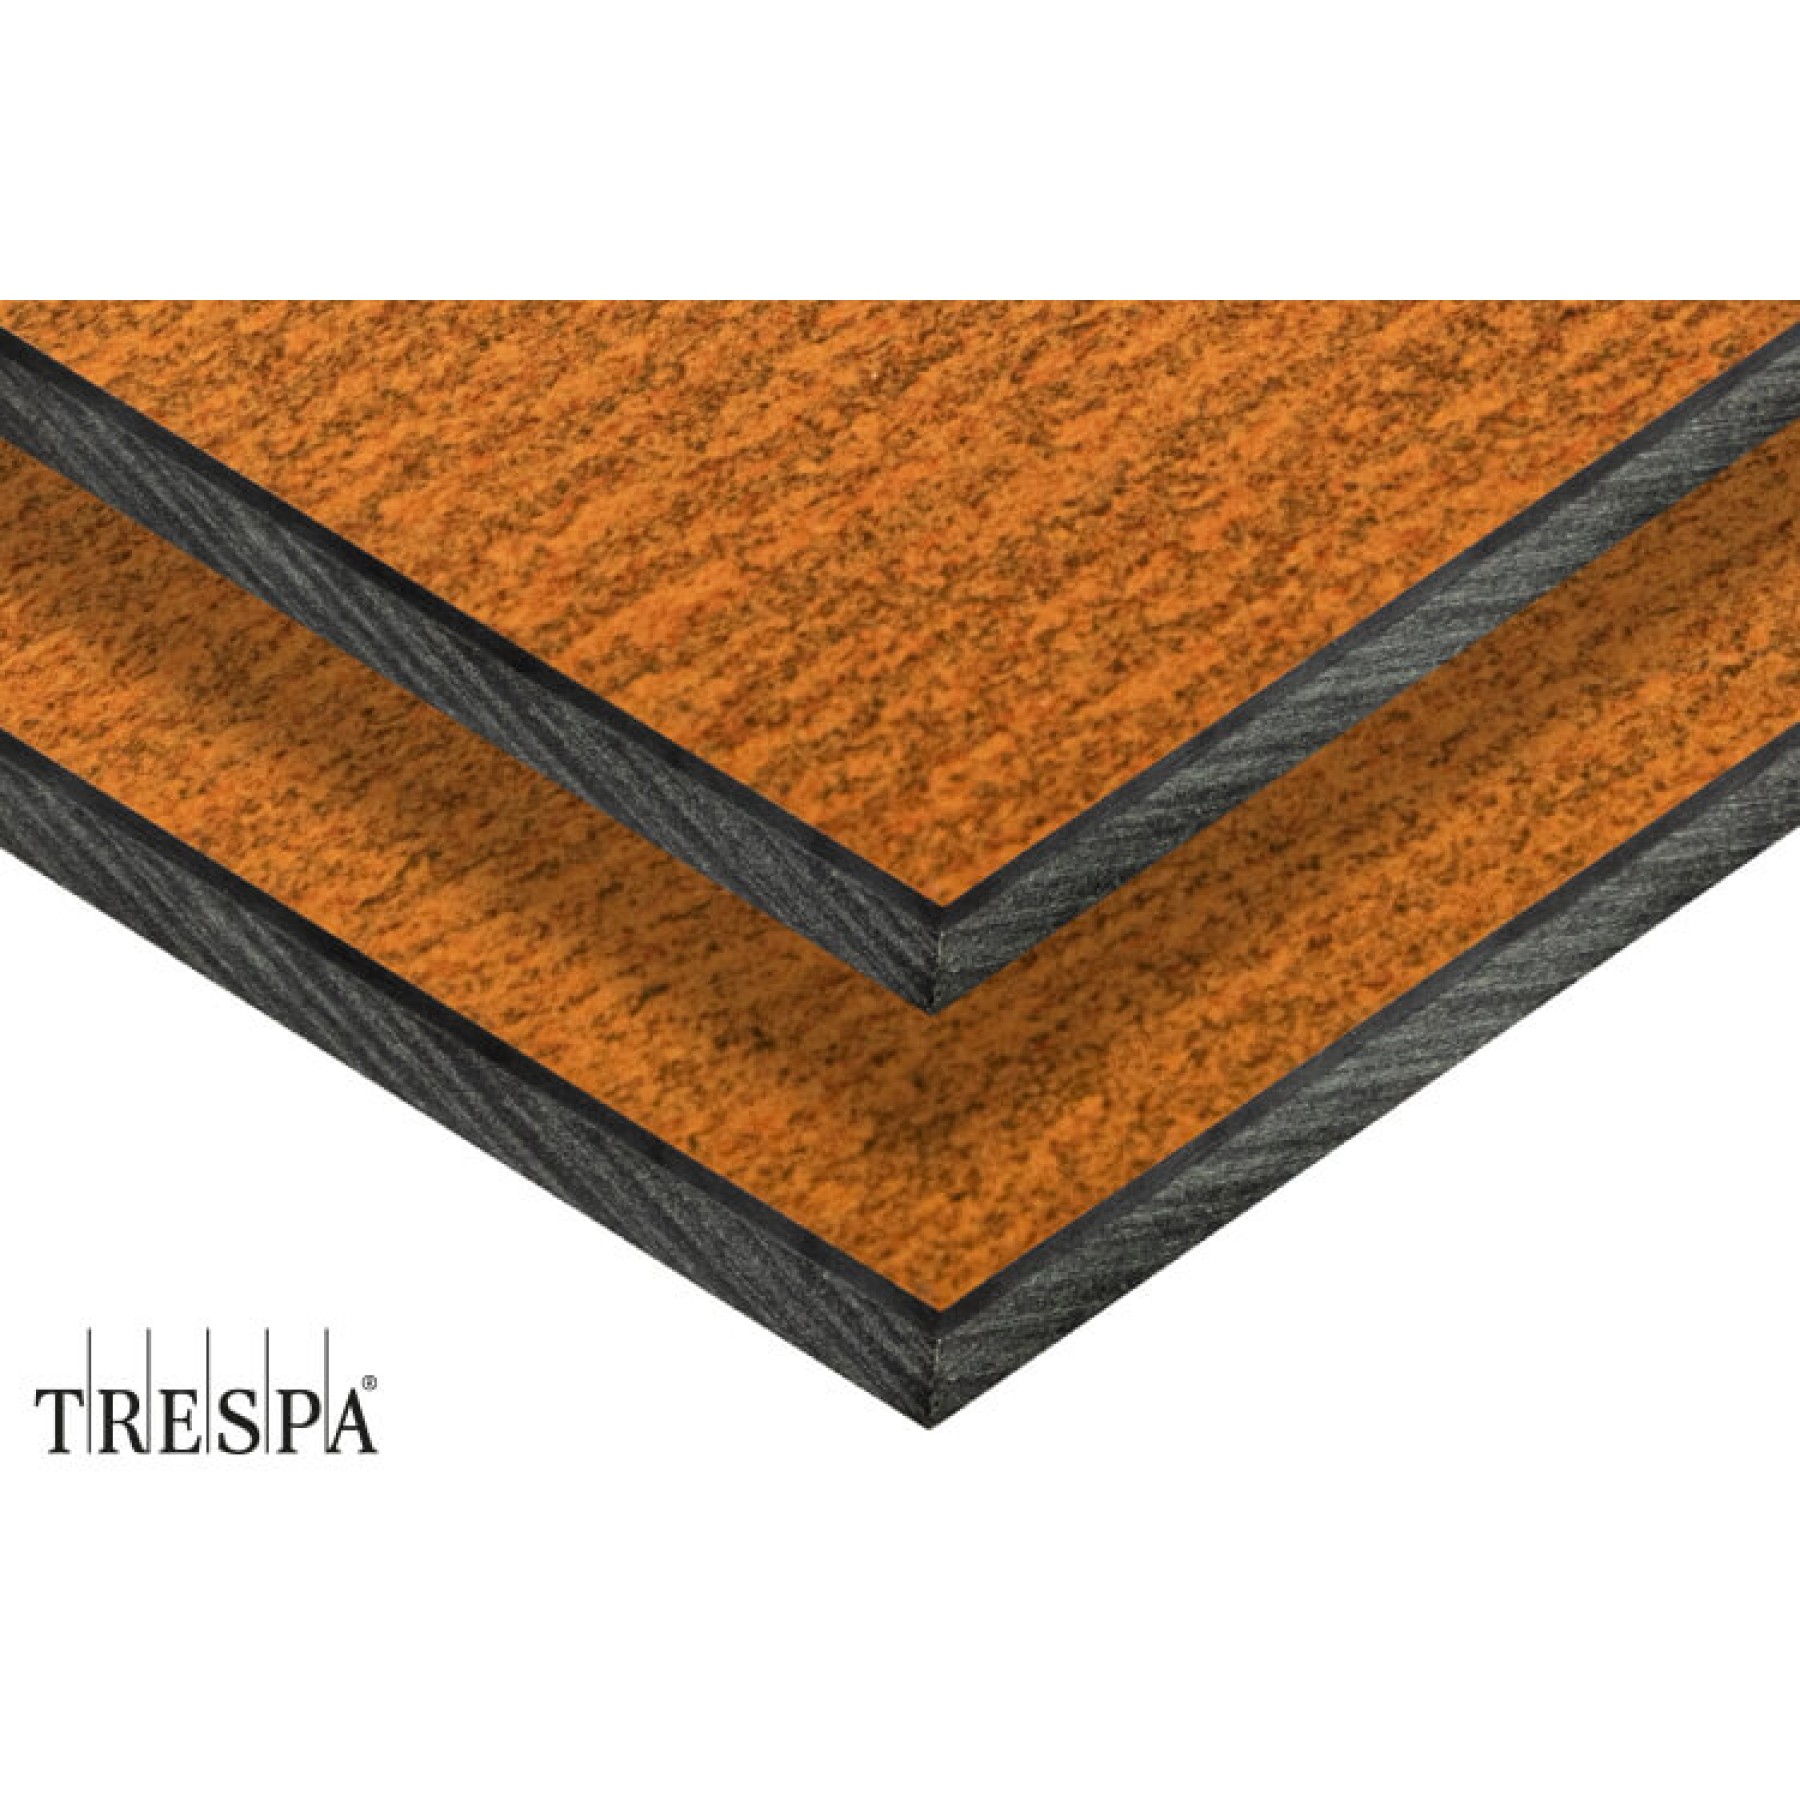 Trespa® Meteon® FR FR panels with NATURALS decor surfaces are suitable for ventilated facade systems in outdoor areas